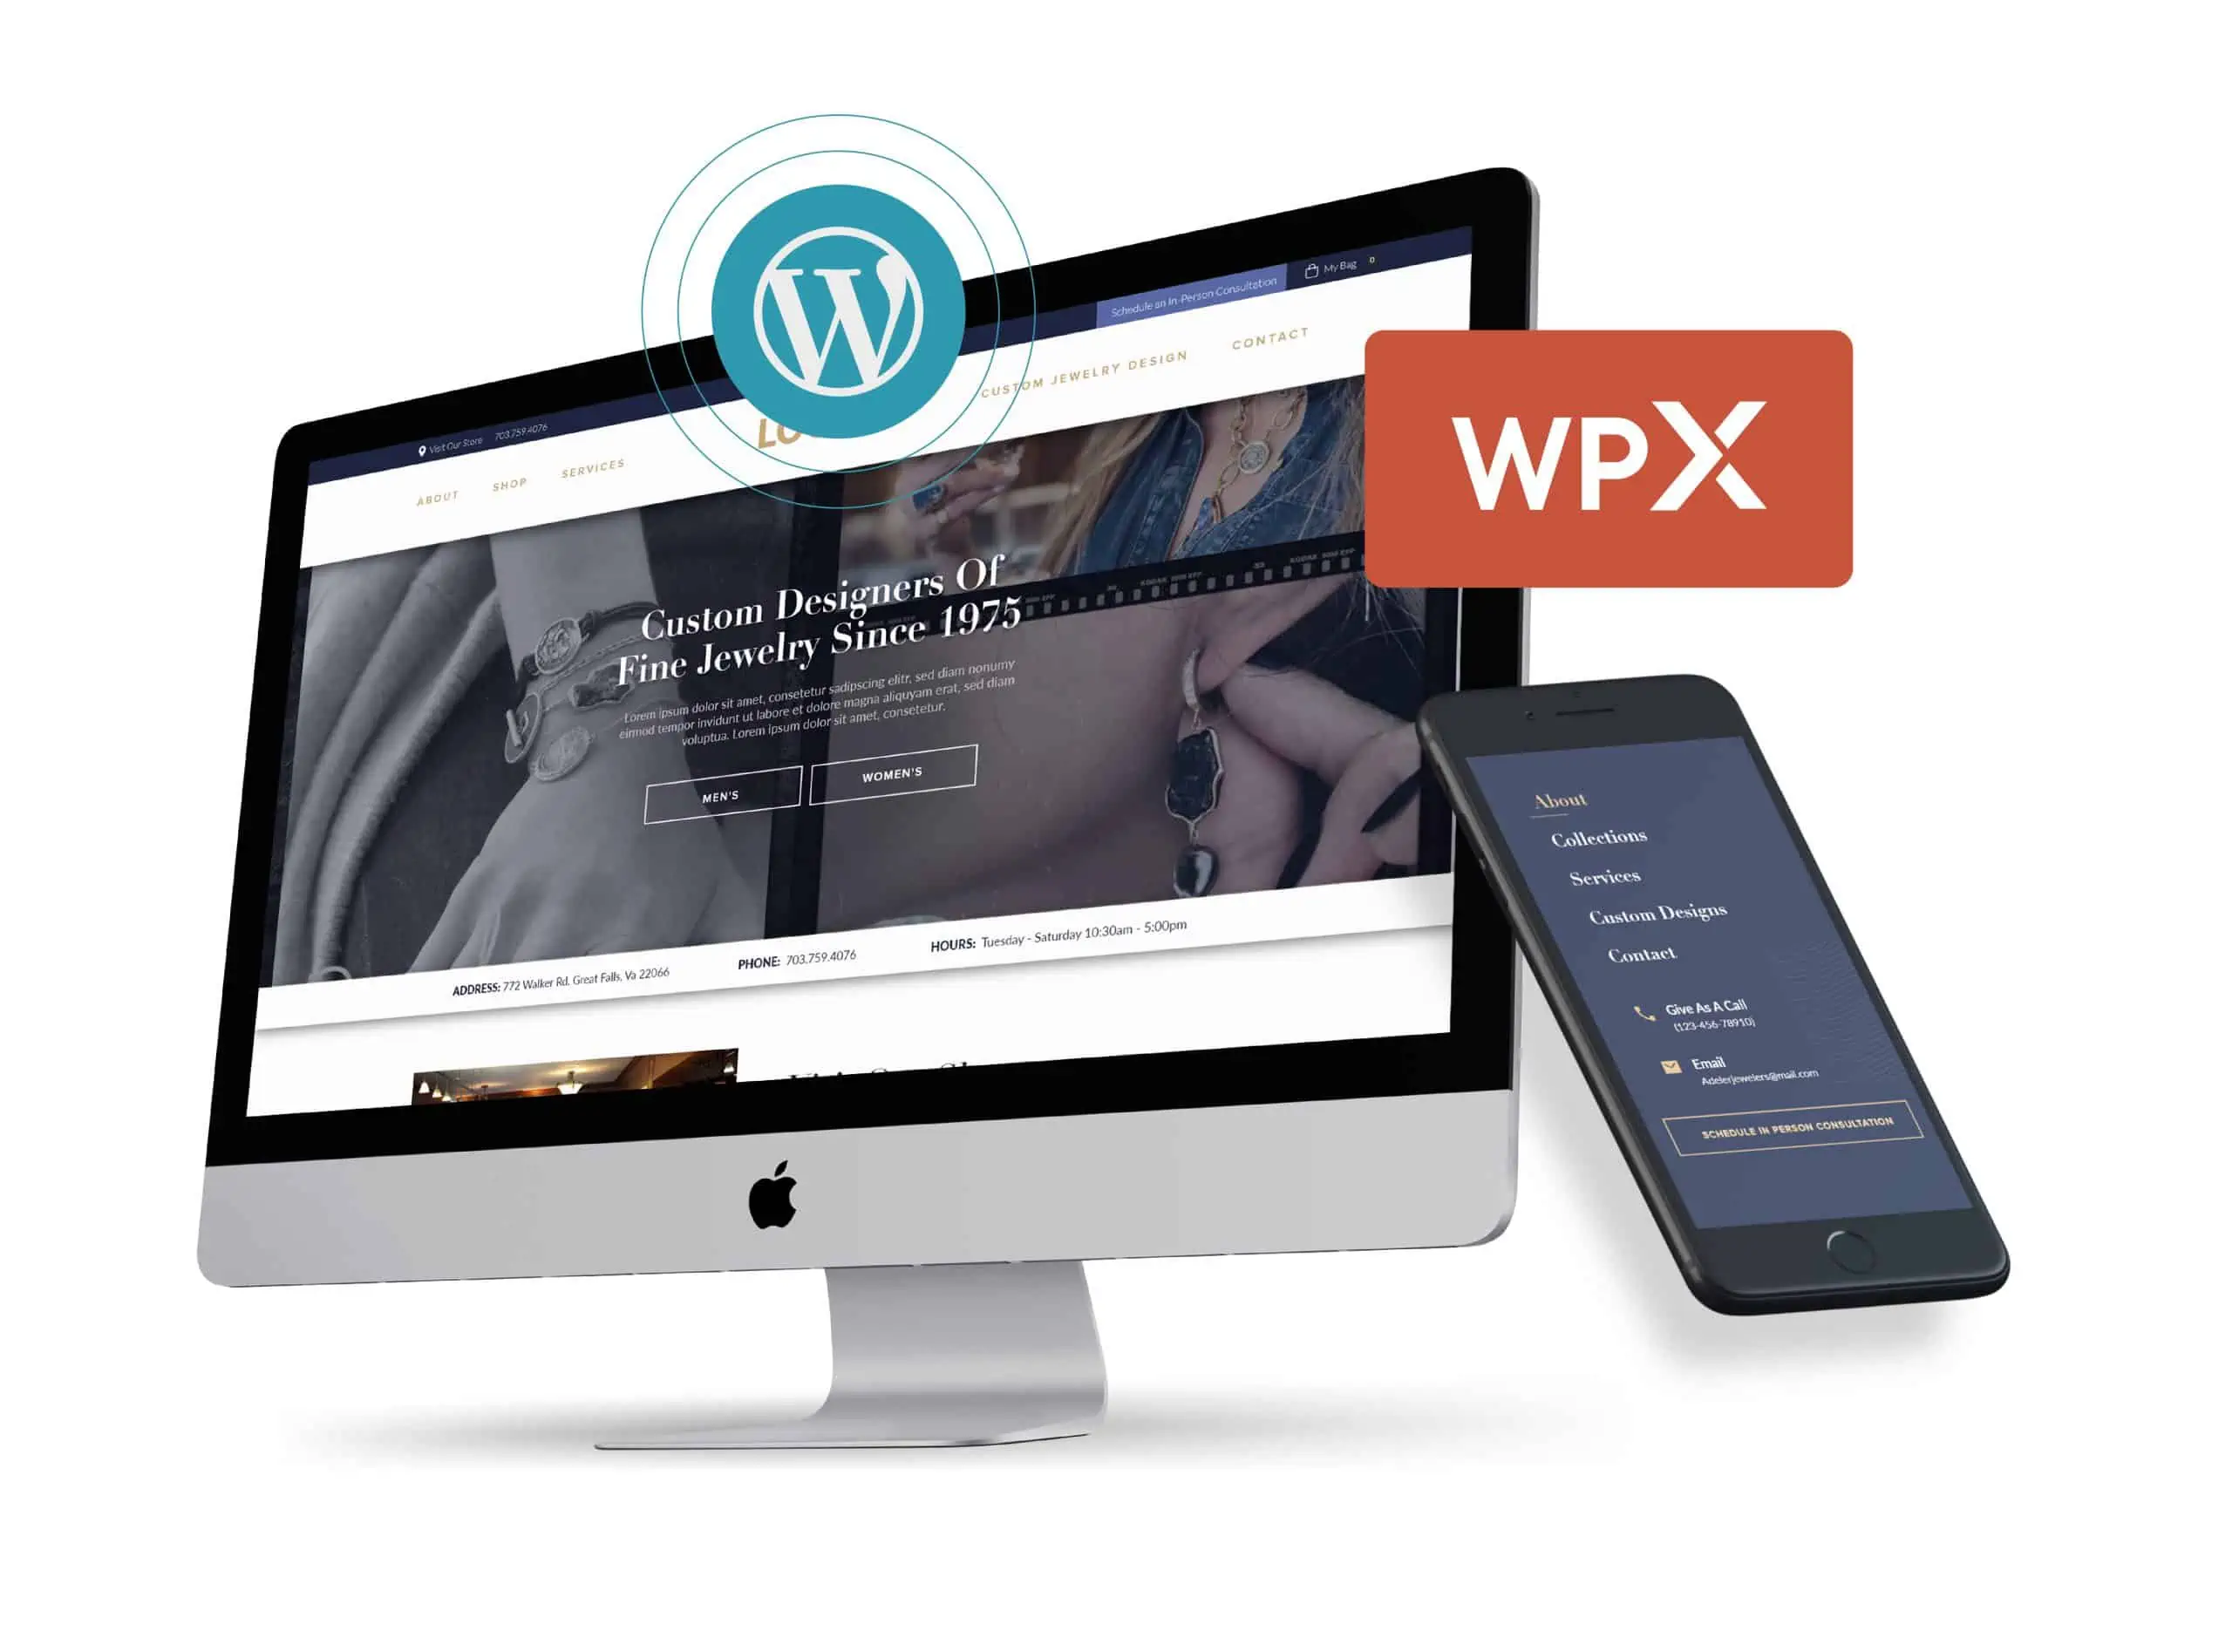 Converting From Wix To Wordpress | WPXStudios